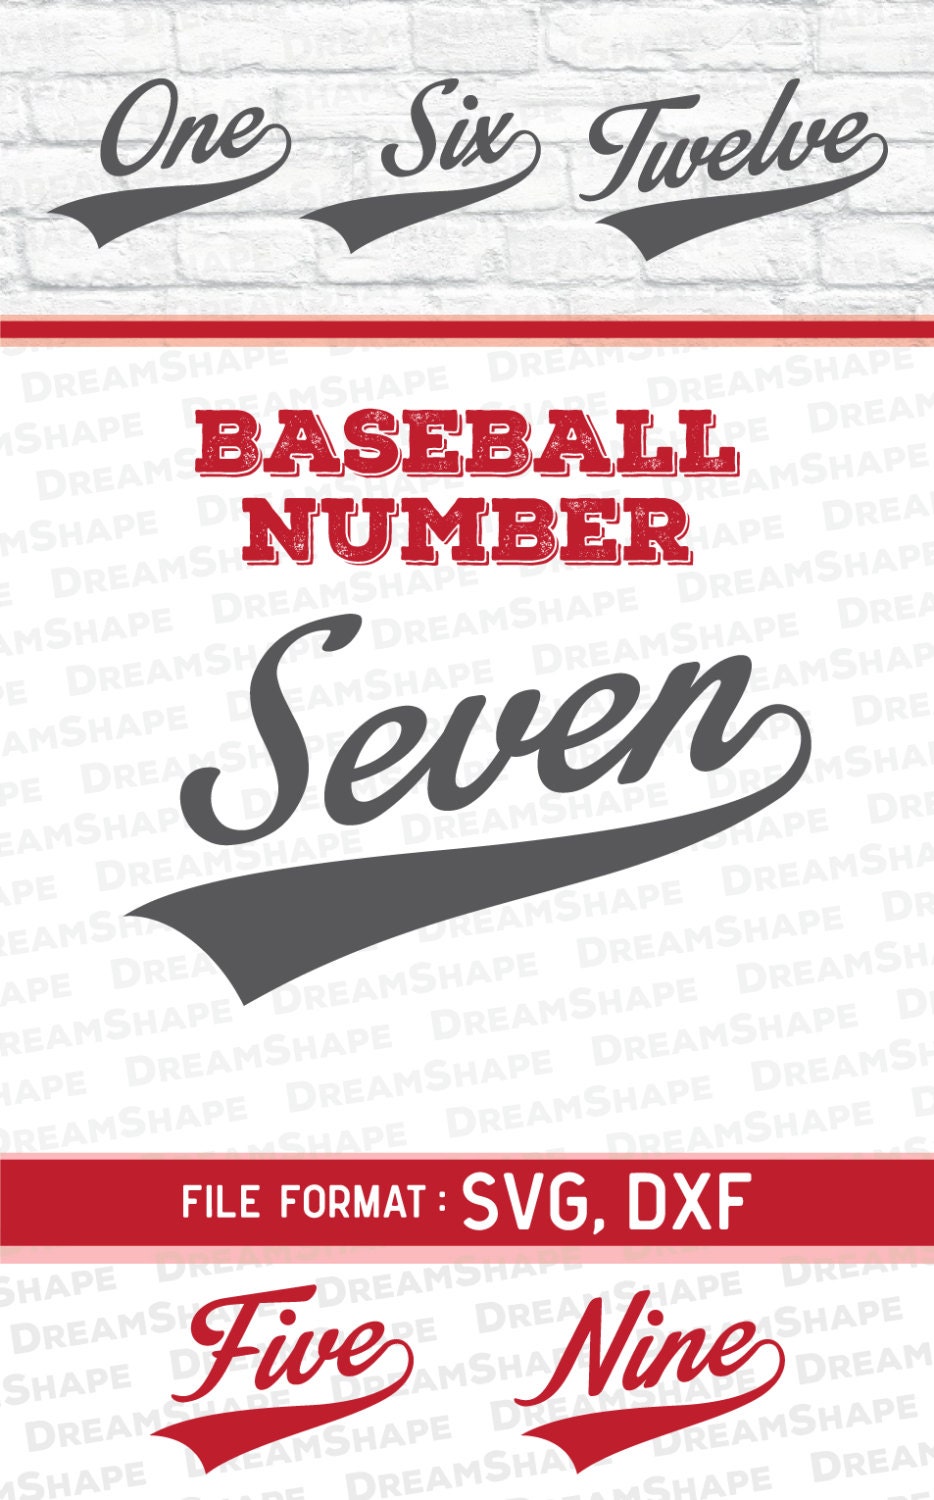 Download SVG One To Twelve Baseball Numbers Cut Files Baseball Number